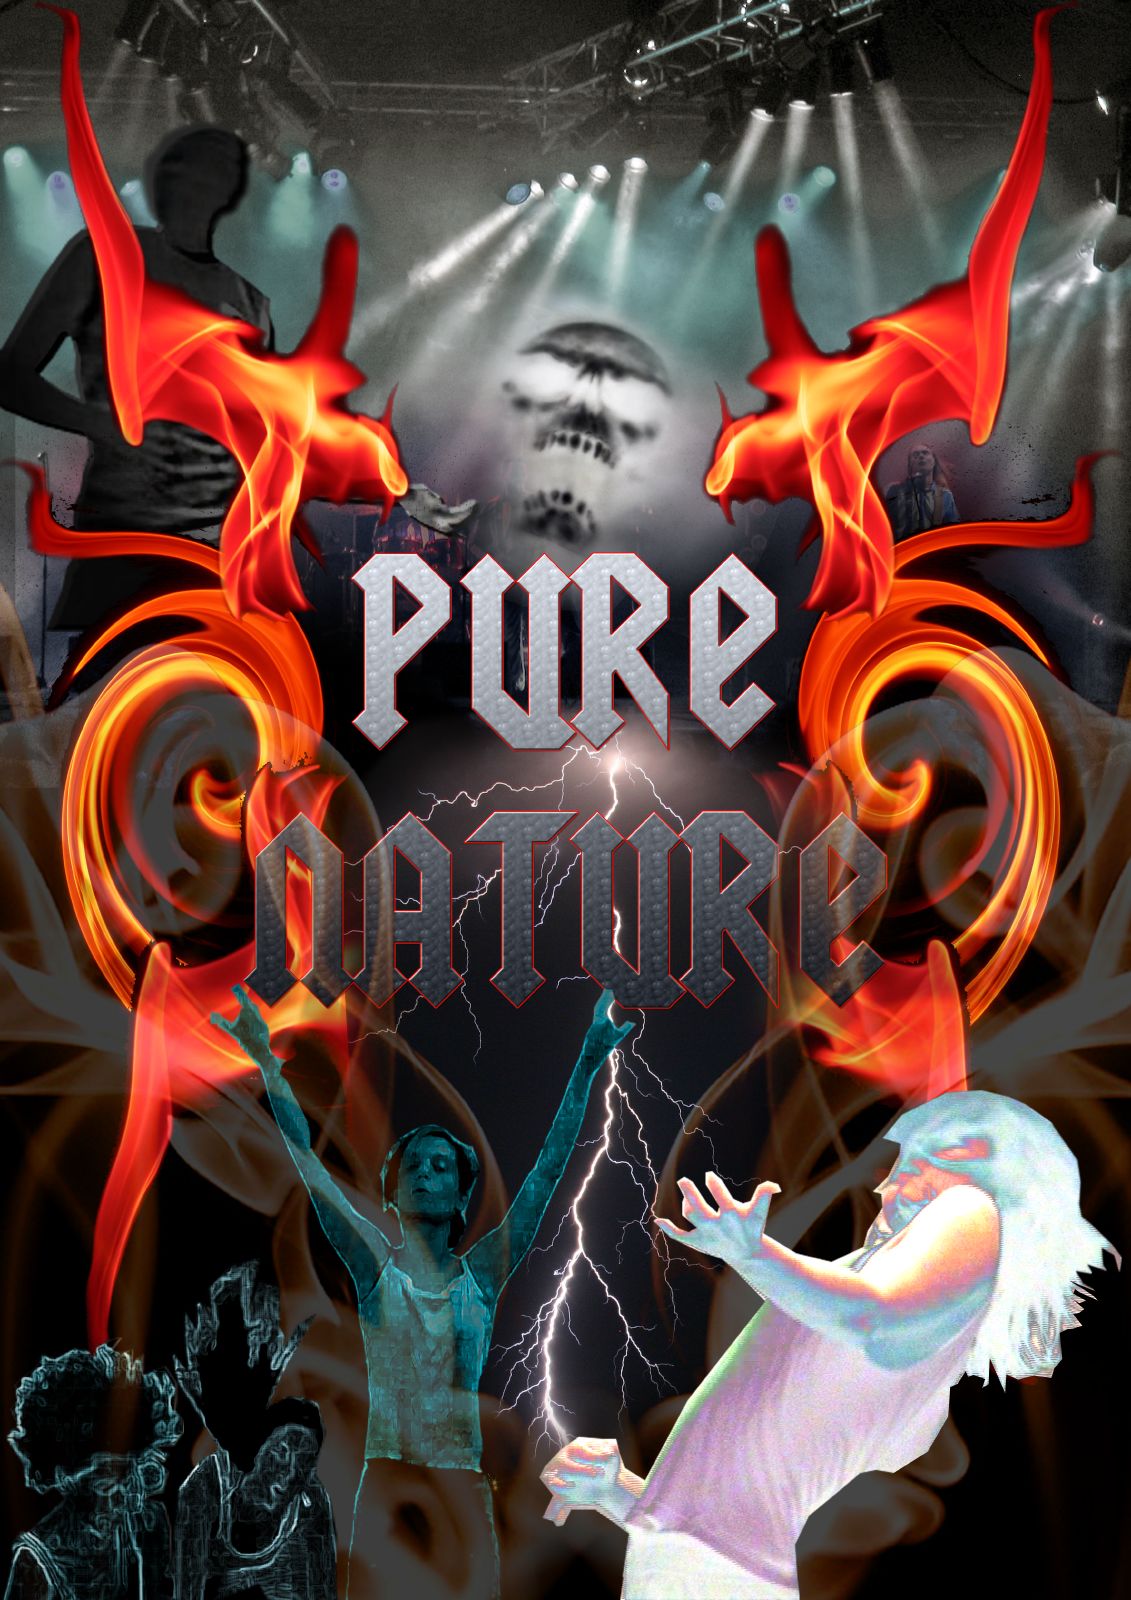 the poster for pure satan festival shows some men and women